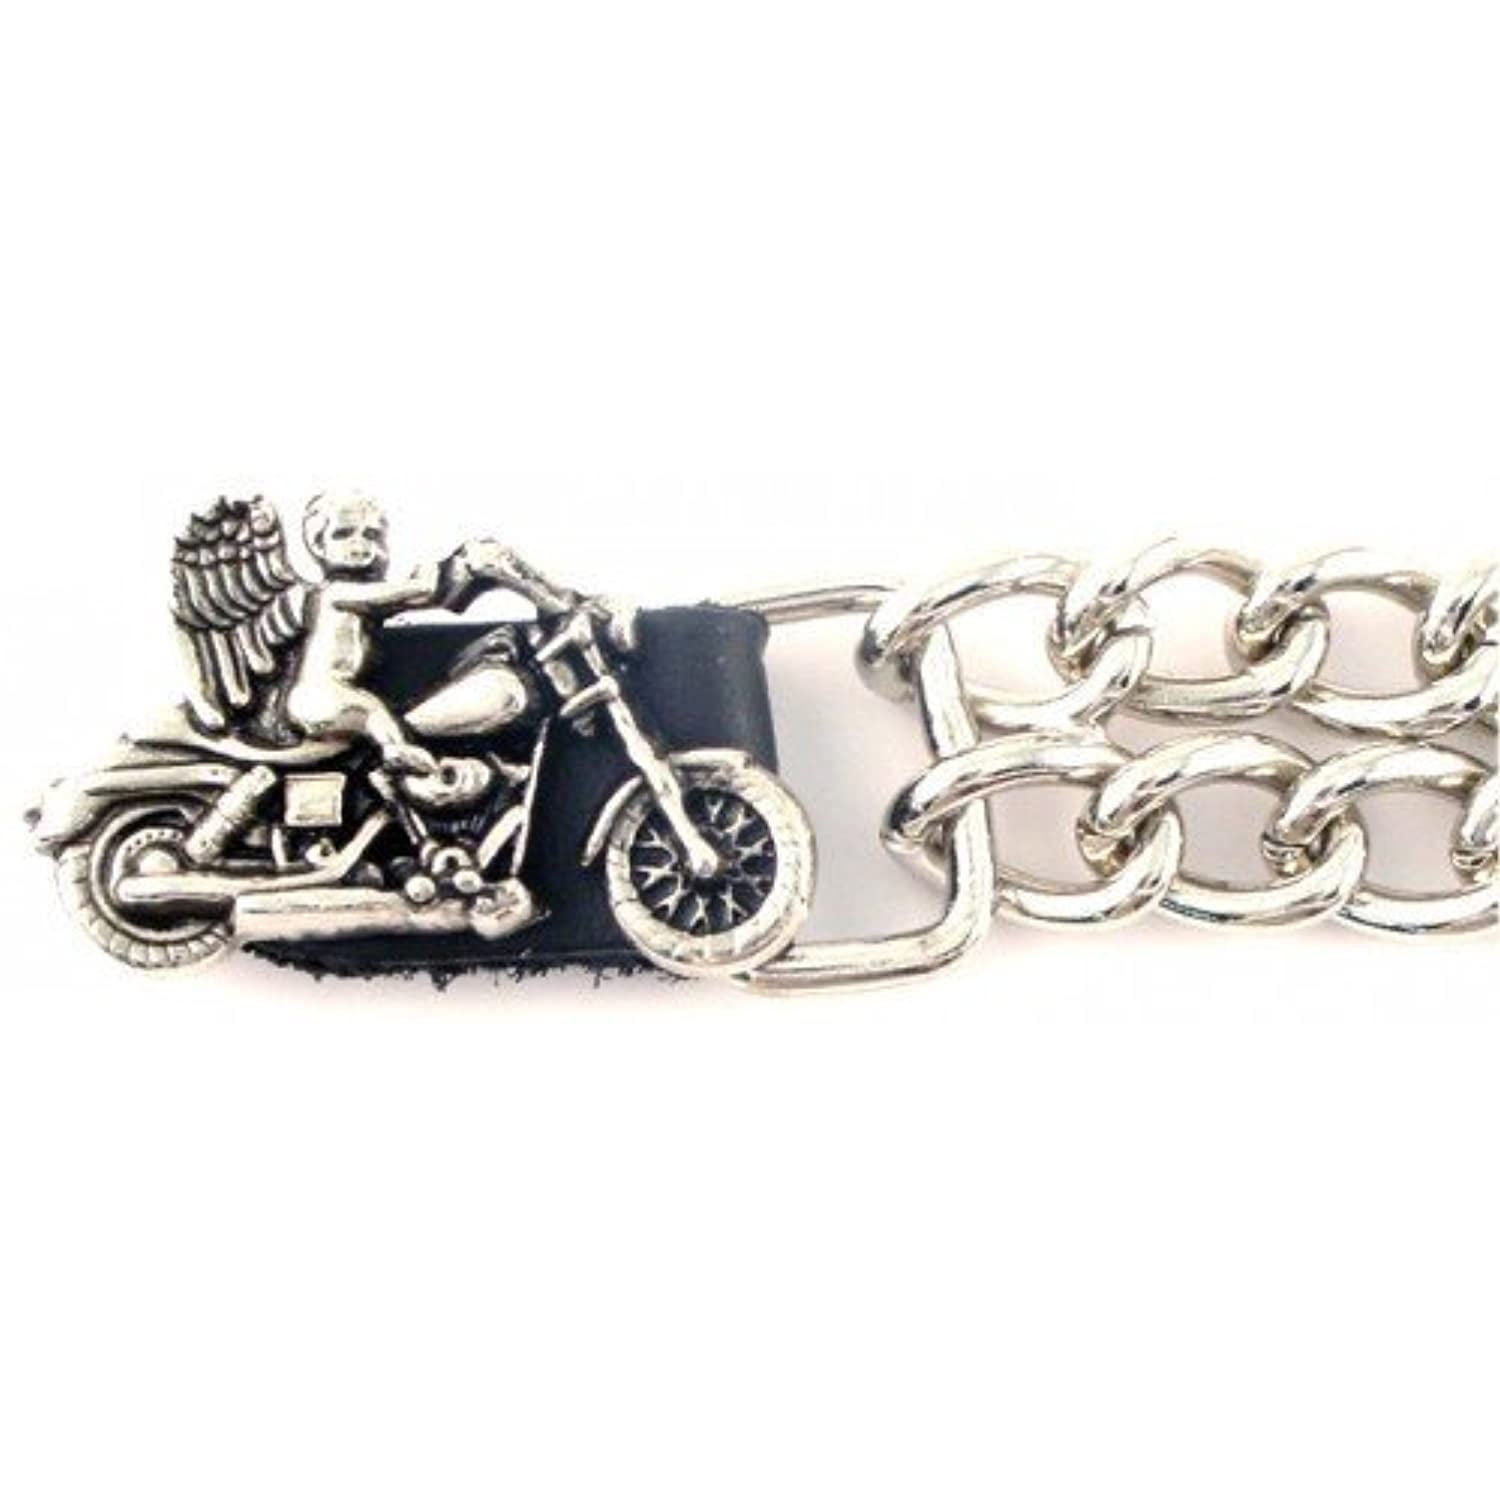 Handcrafted Key Chain To Match Our Vest Extenders Biker of Faith 